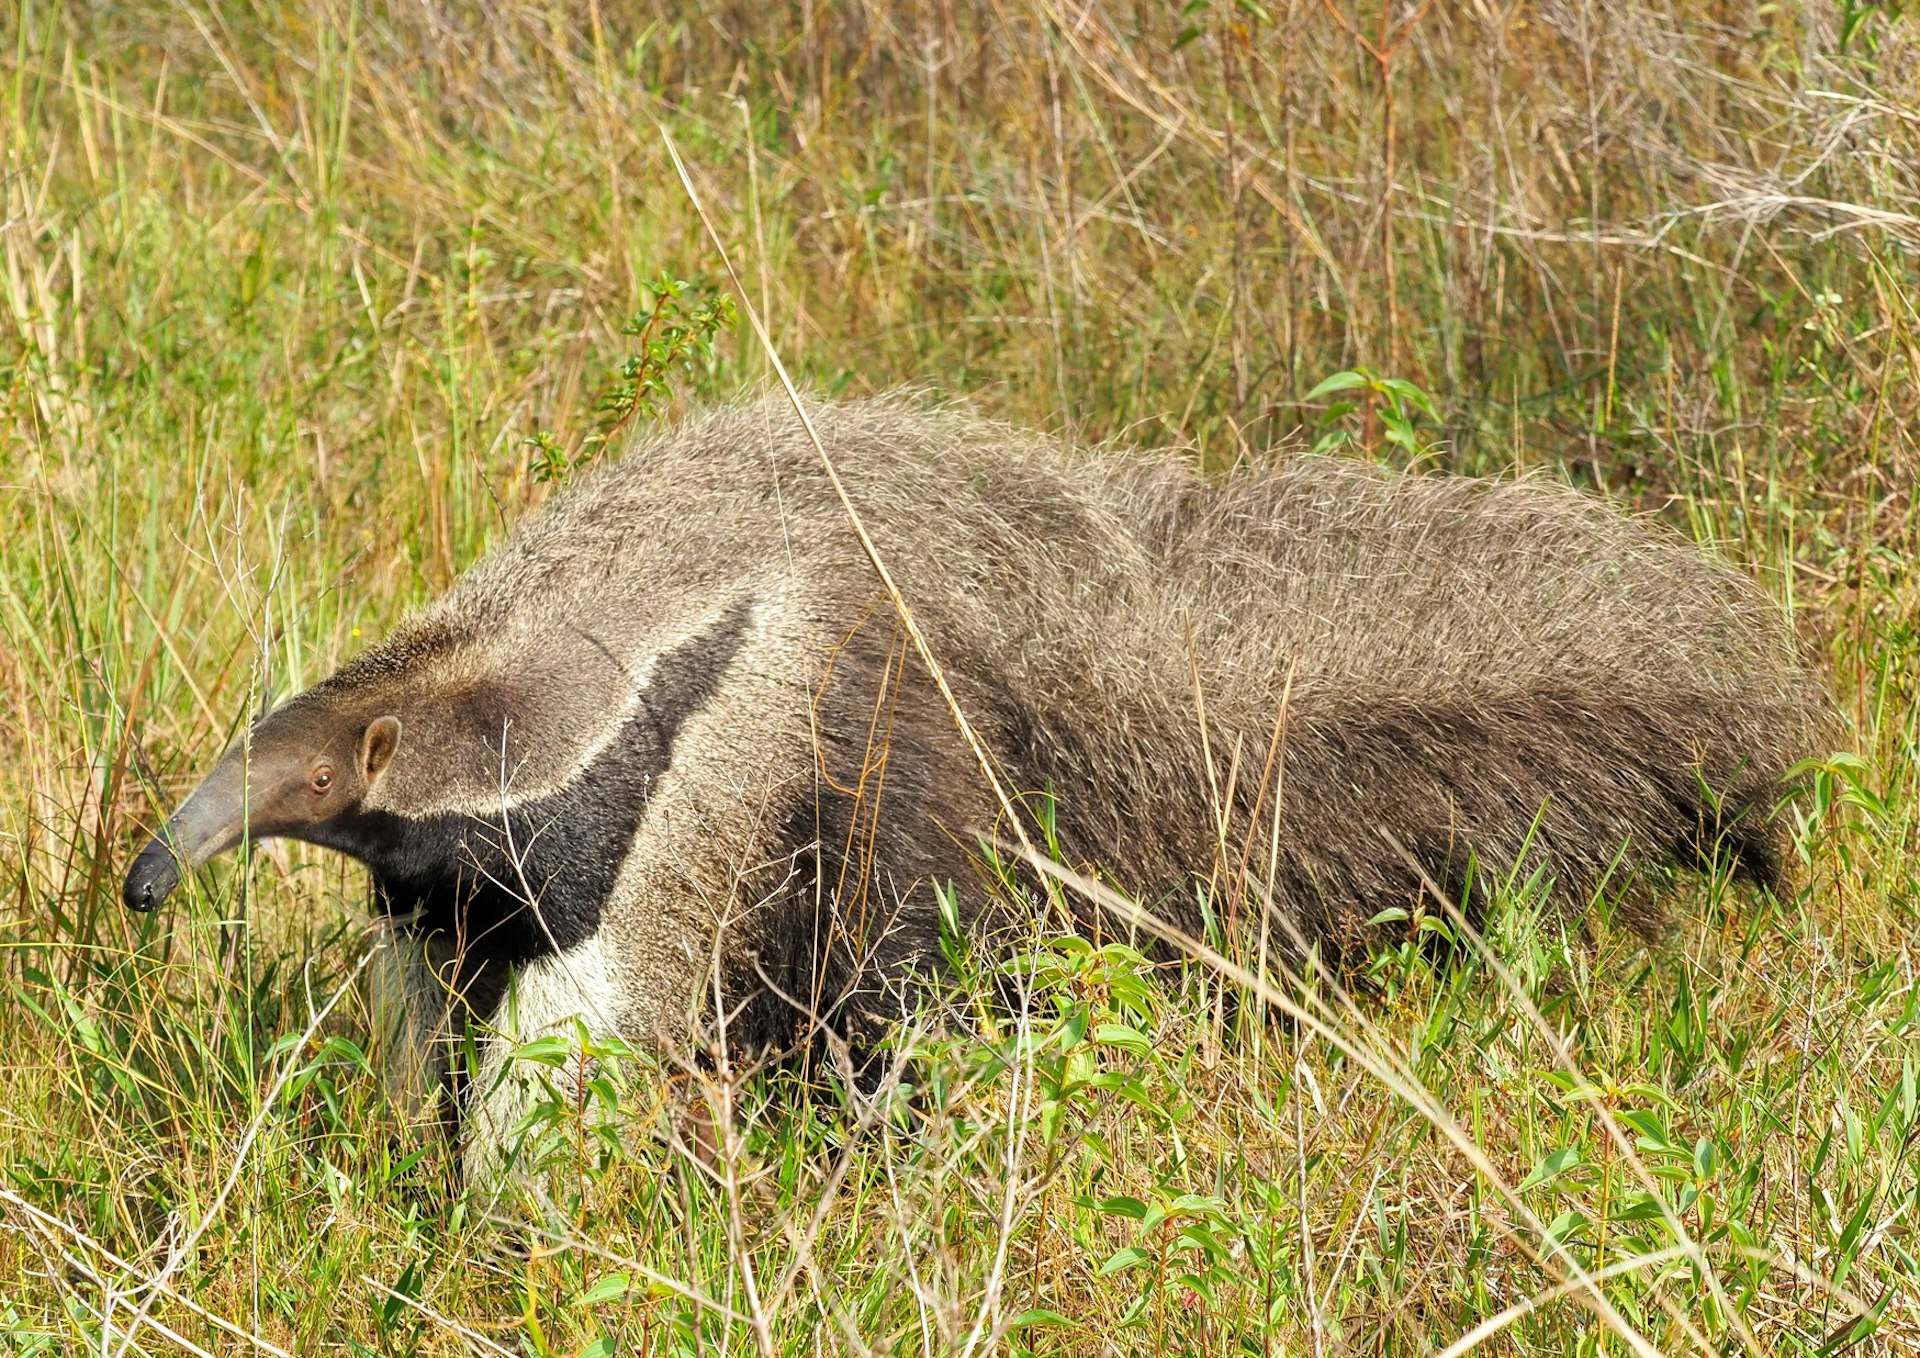 A giant anteater, with its long nose, walks in long grass; its lower half is dark brown, while its top is lighter in color.